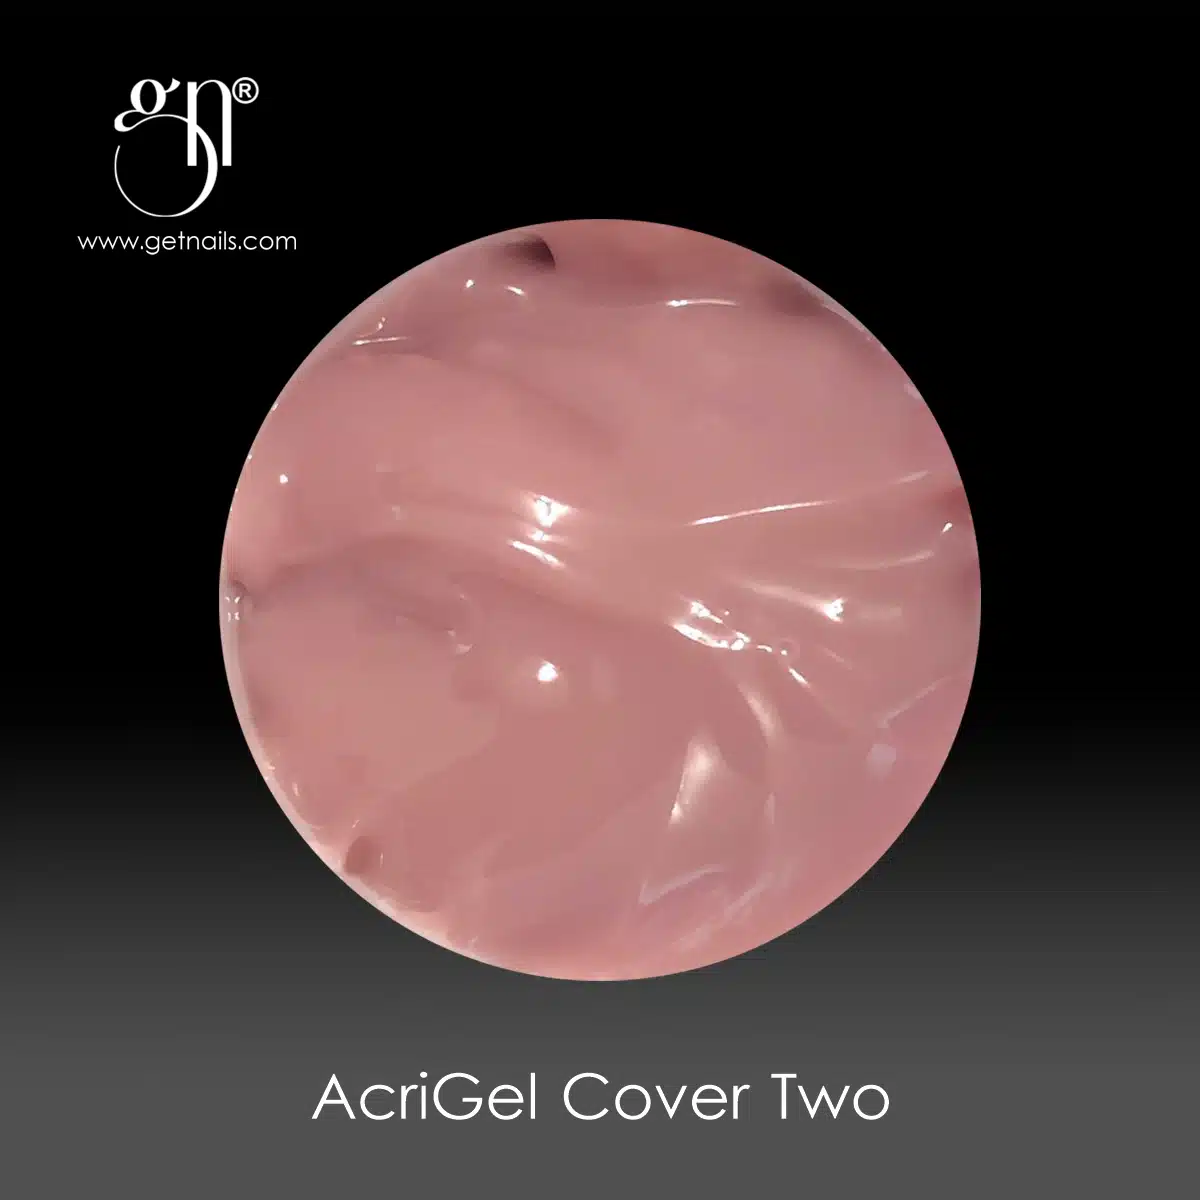 Get Nails Austria - AcriGel Cover Two 50g